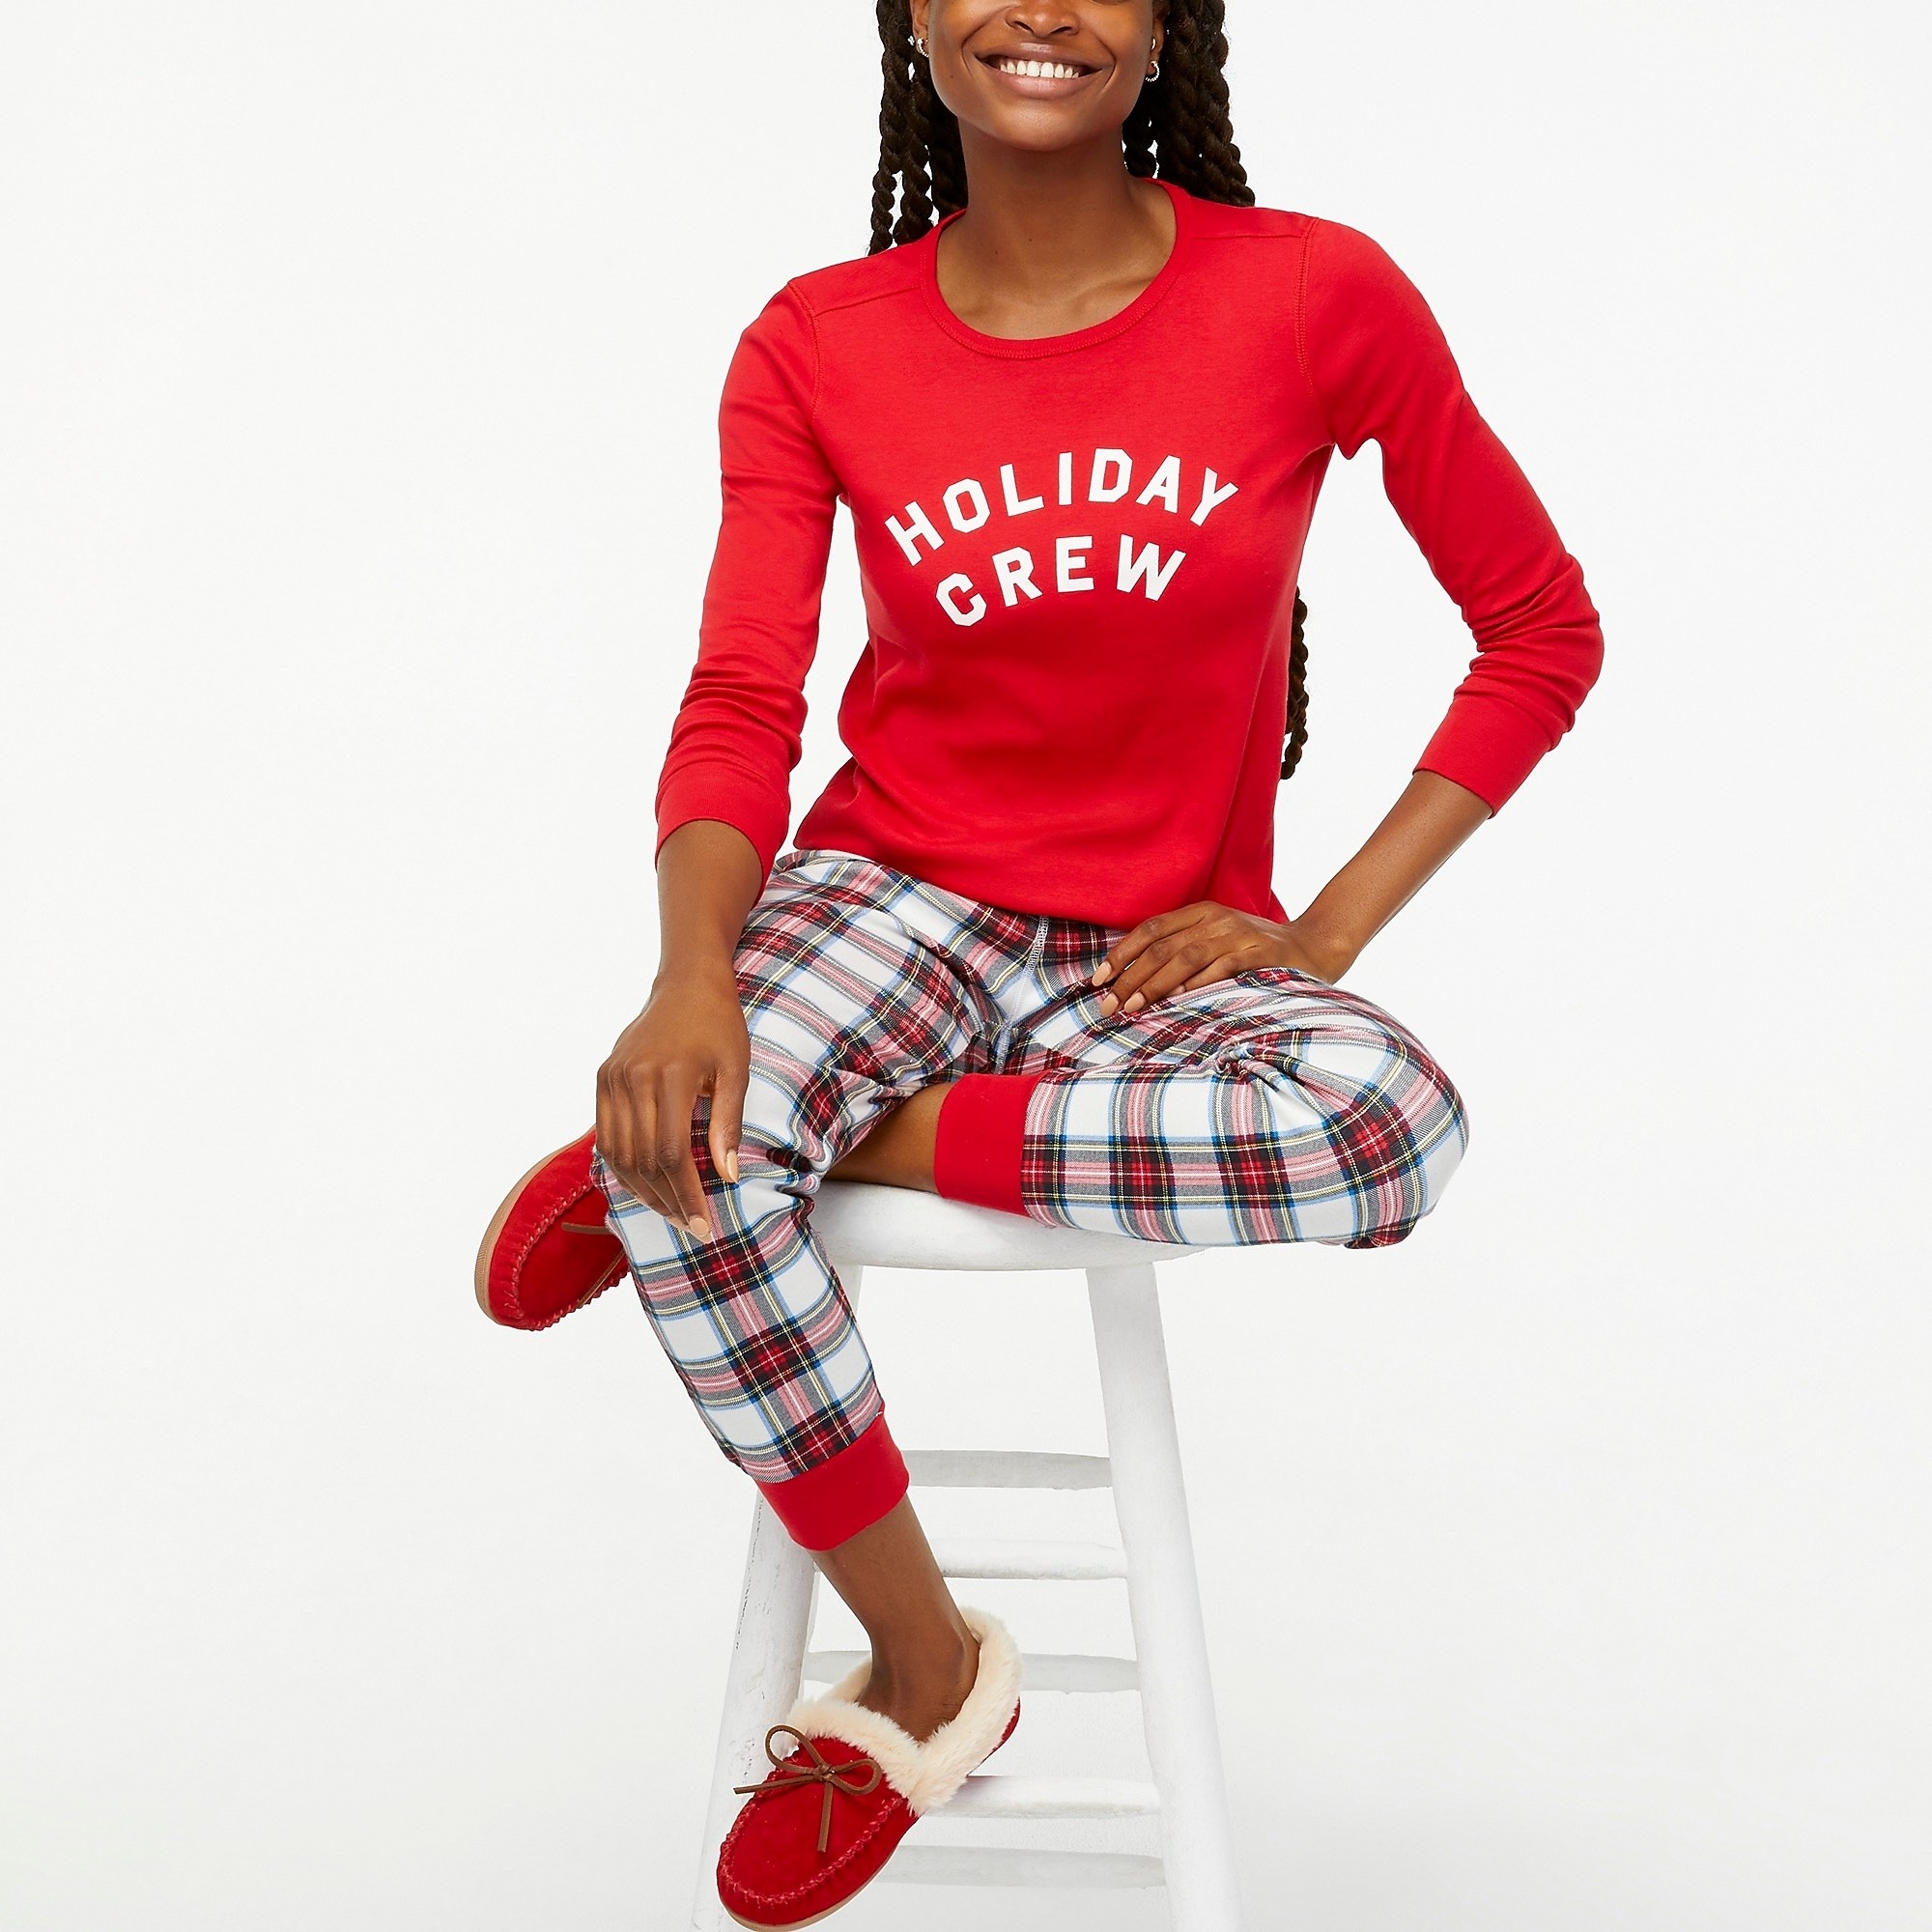 Model wearing red top with red plaid pants and red shoes